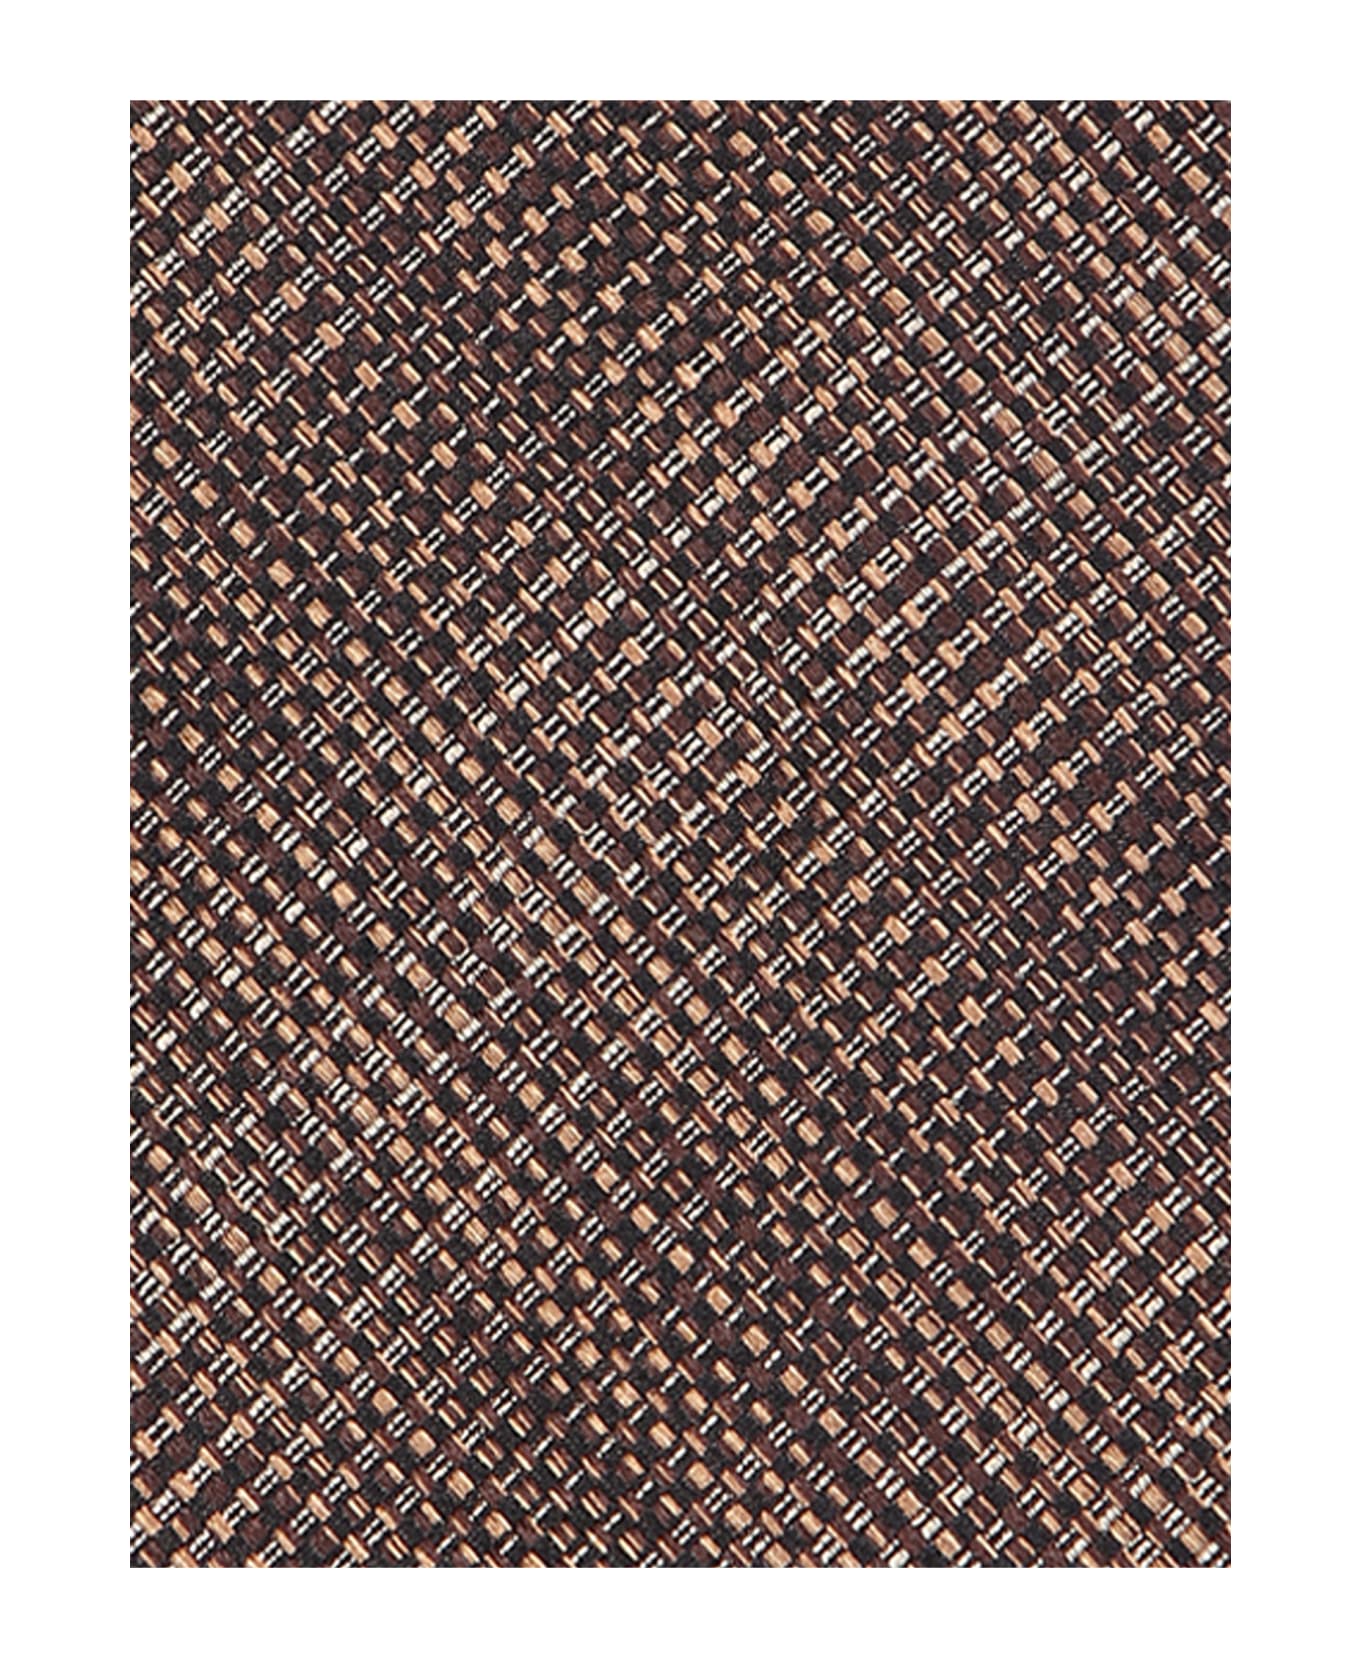 Tom Ford Micro-patterned Black And Beige Tie - Black